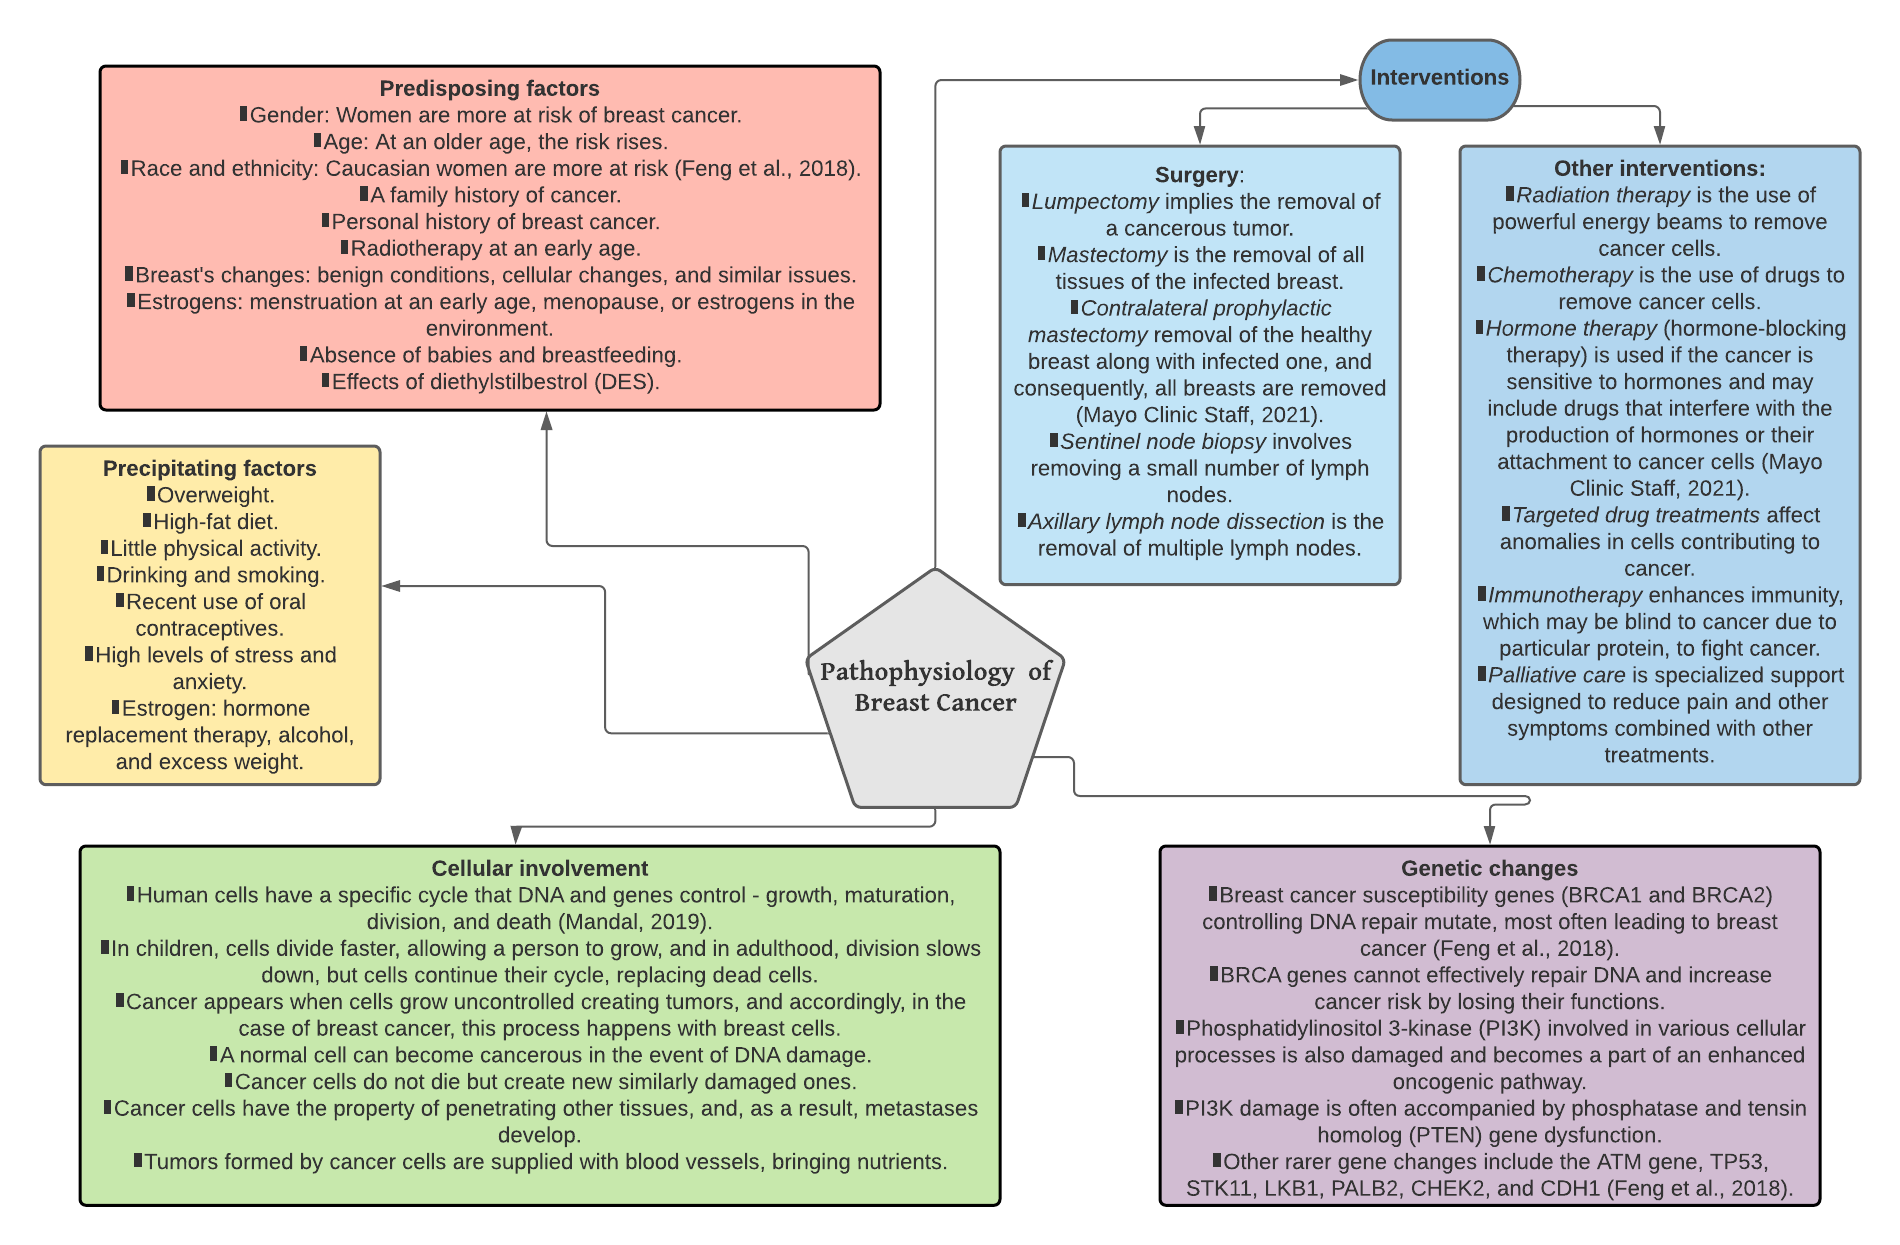 Pathophysiology of breast cancer: concept map. The map is made by the author with the help of the Lucidhart instrument